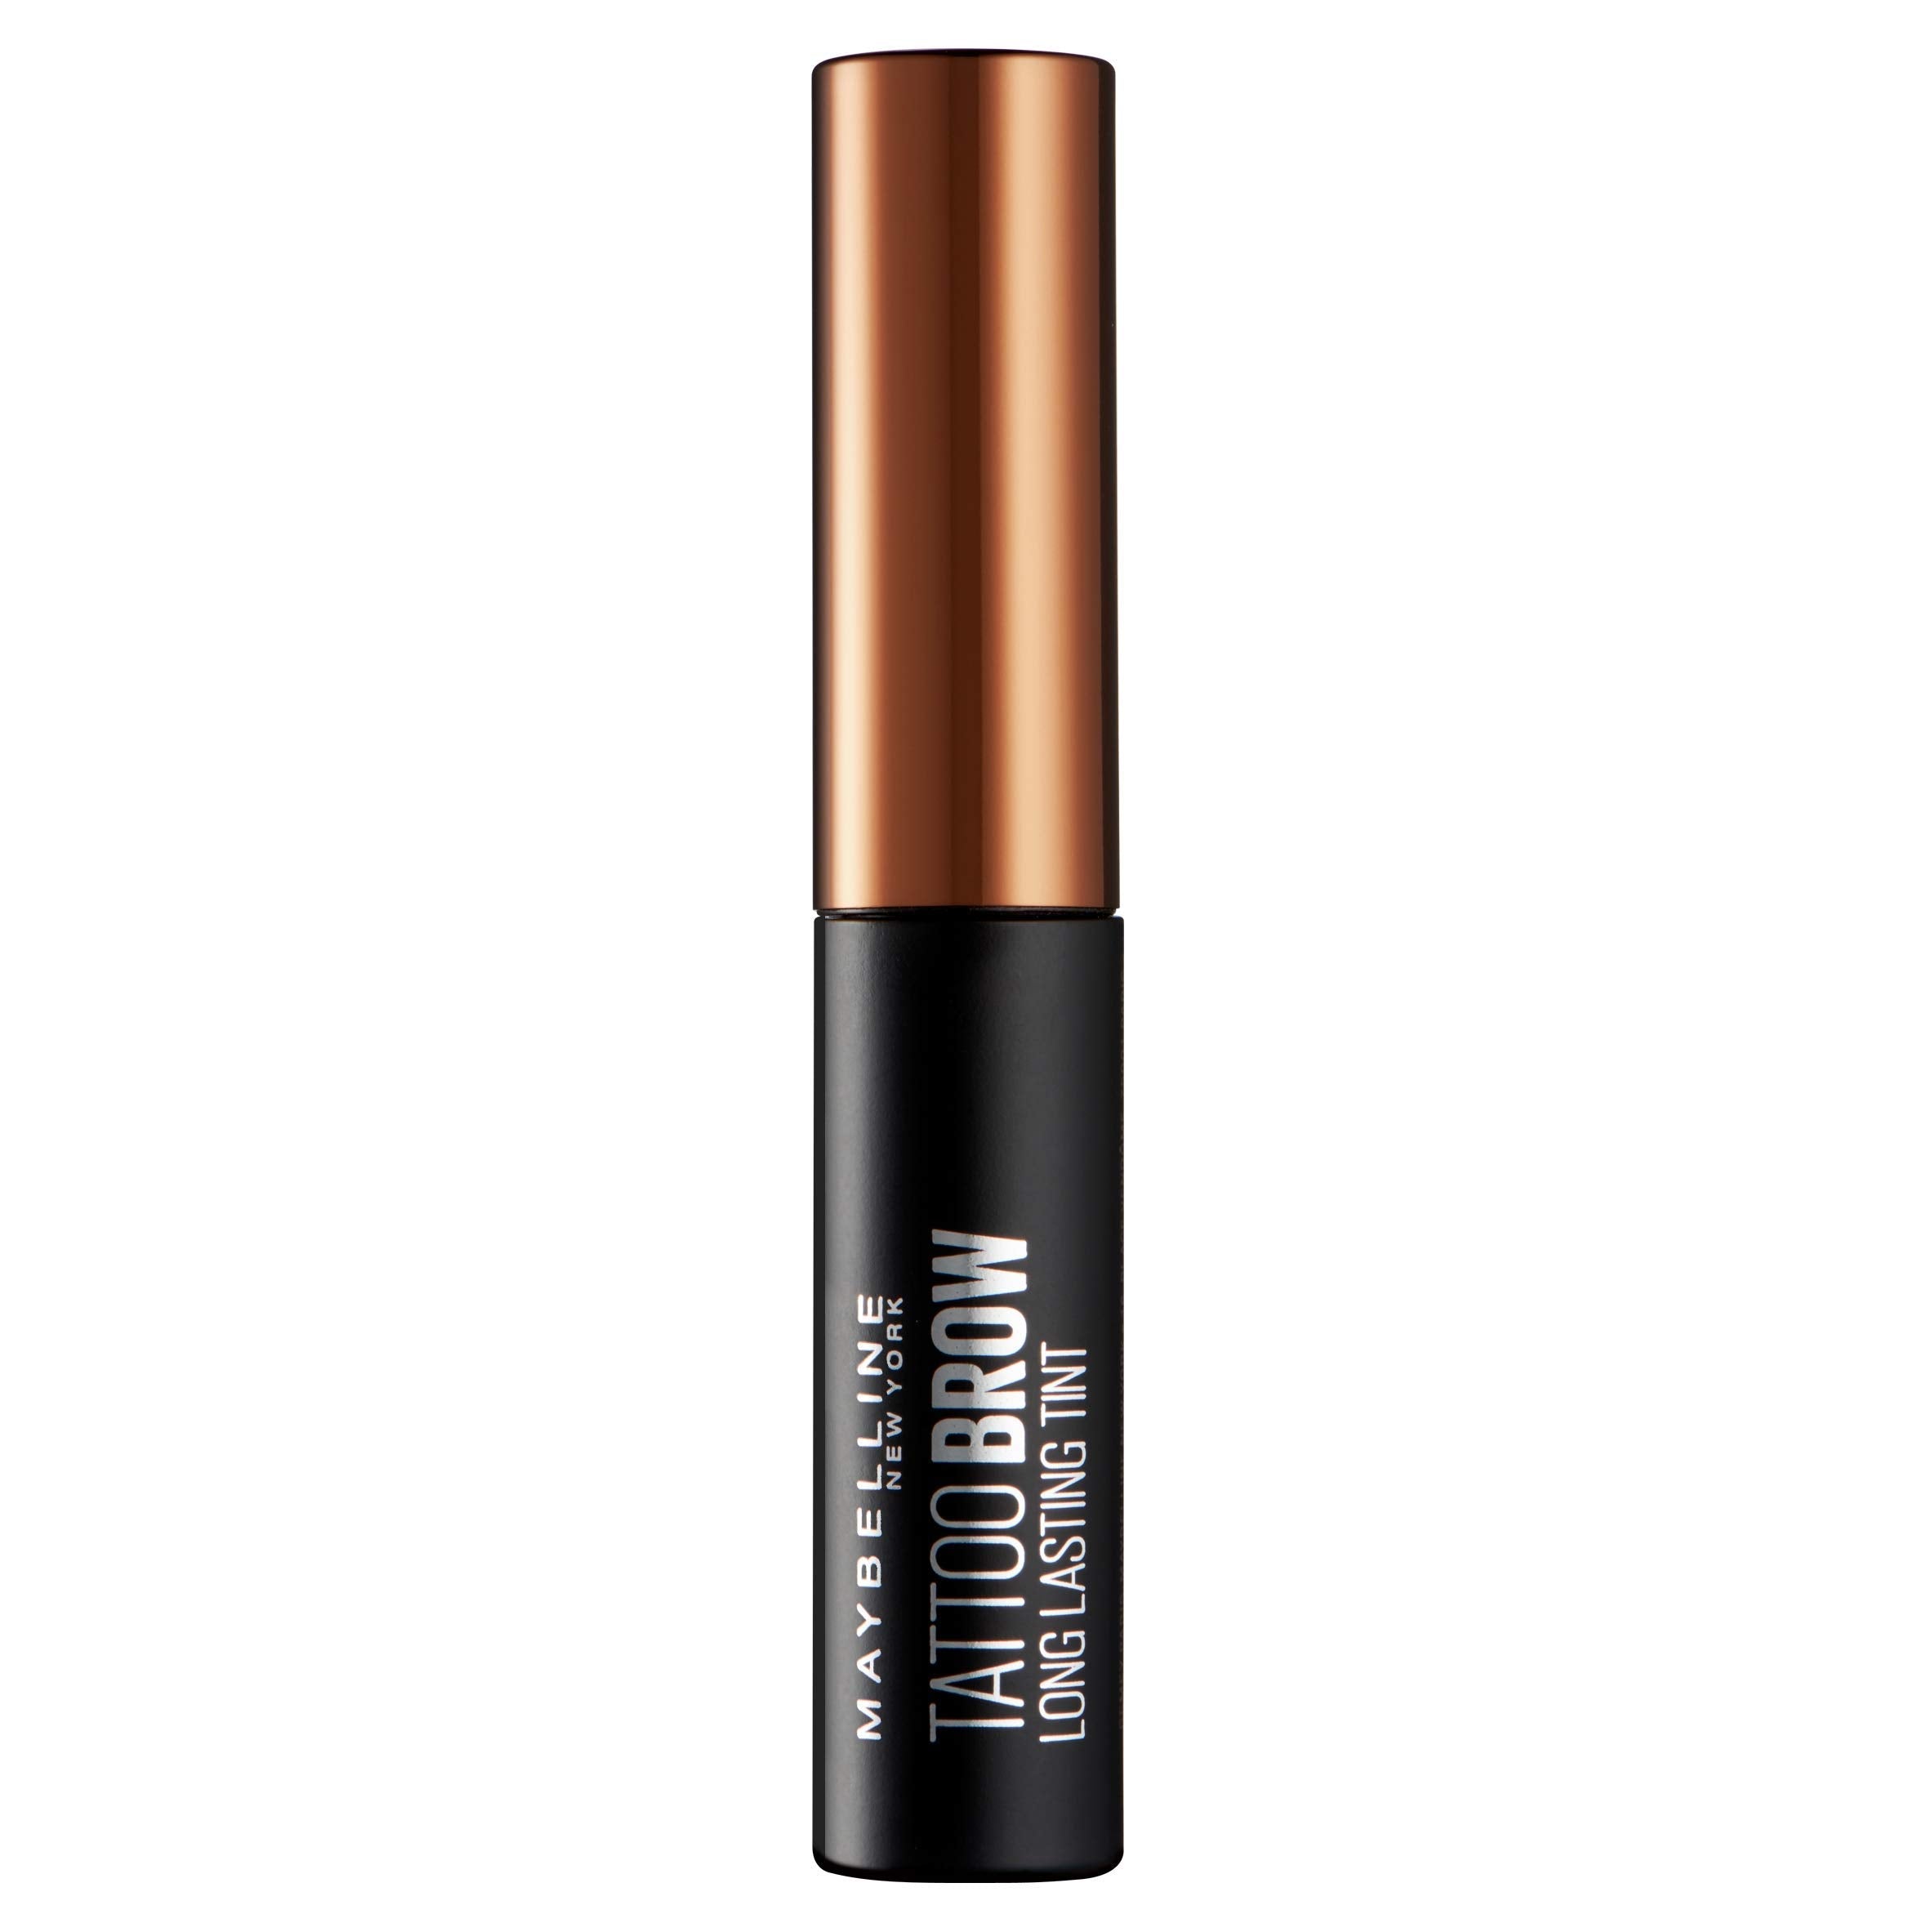 Maybelline New York Tattoo Brow Peel Off Eyebrow Gel Tint, Semi-Permanent Colour, Waterproof, Lasts up to 3 Days, Colour: Dark Brown